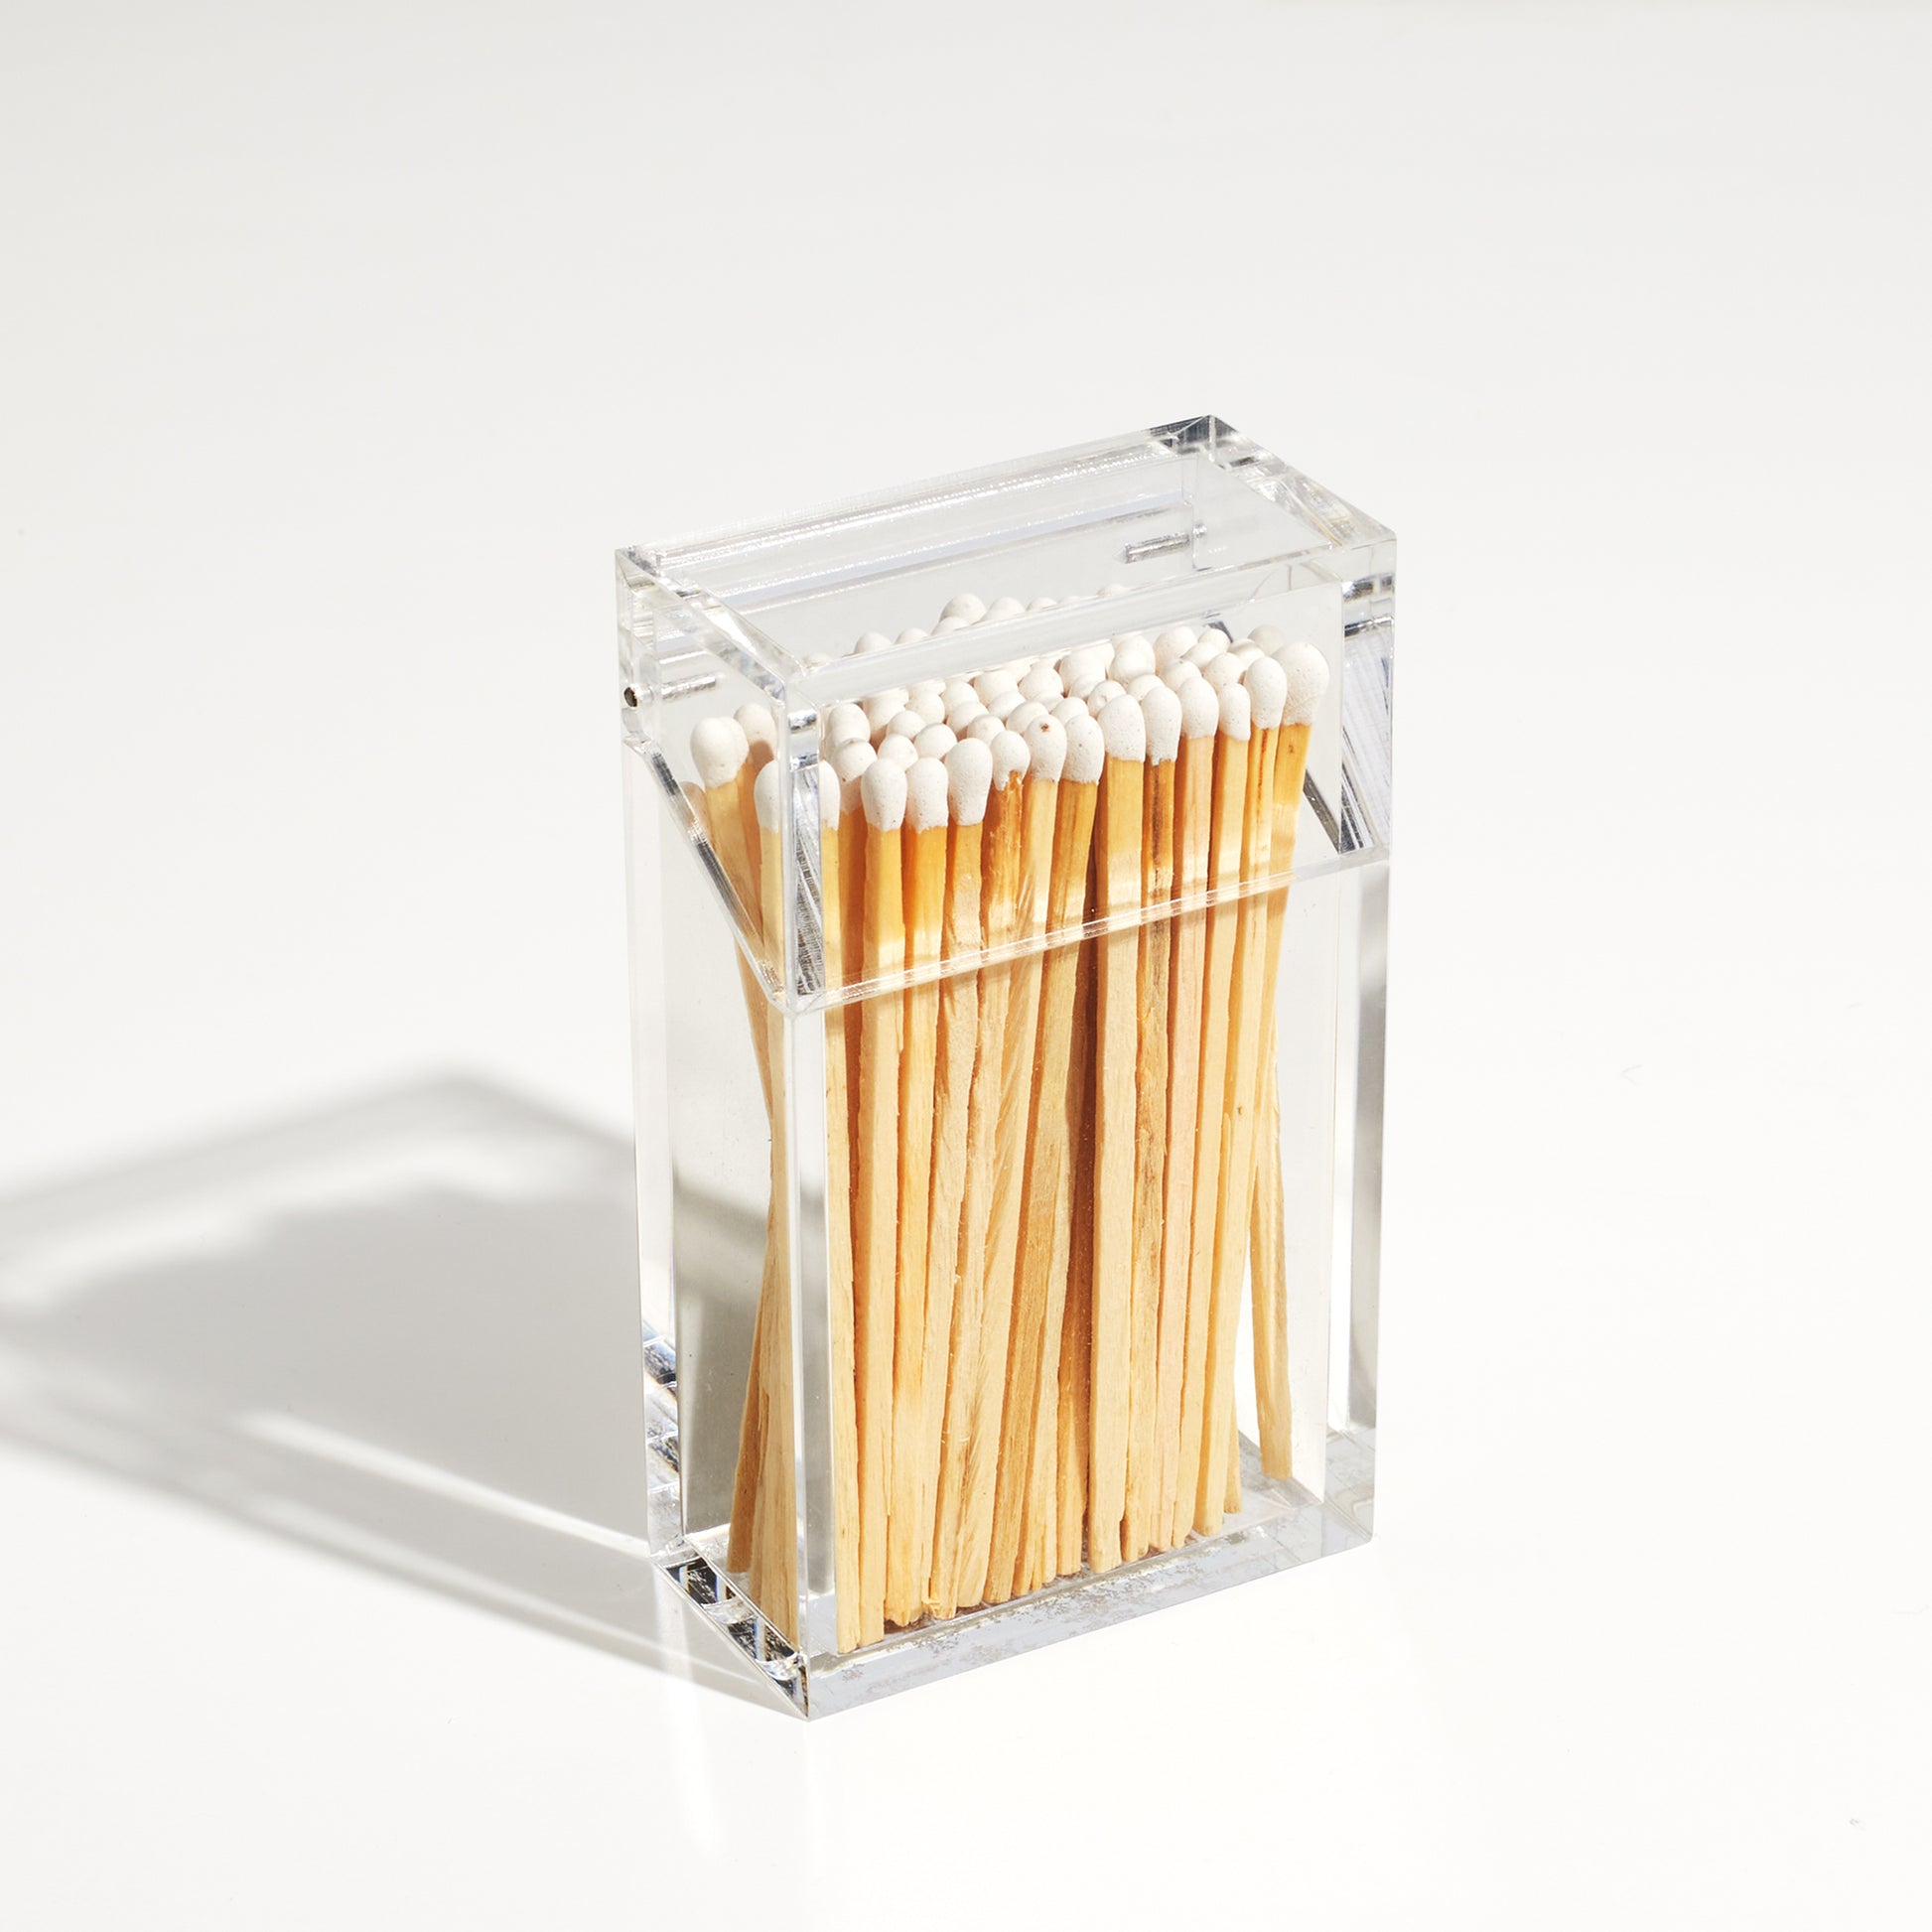 Match holder shaped like a Cigarette style acrylic case with matches in it.